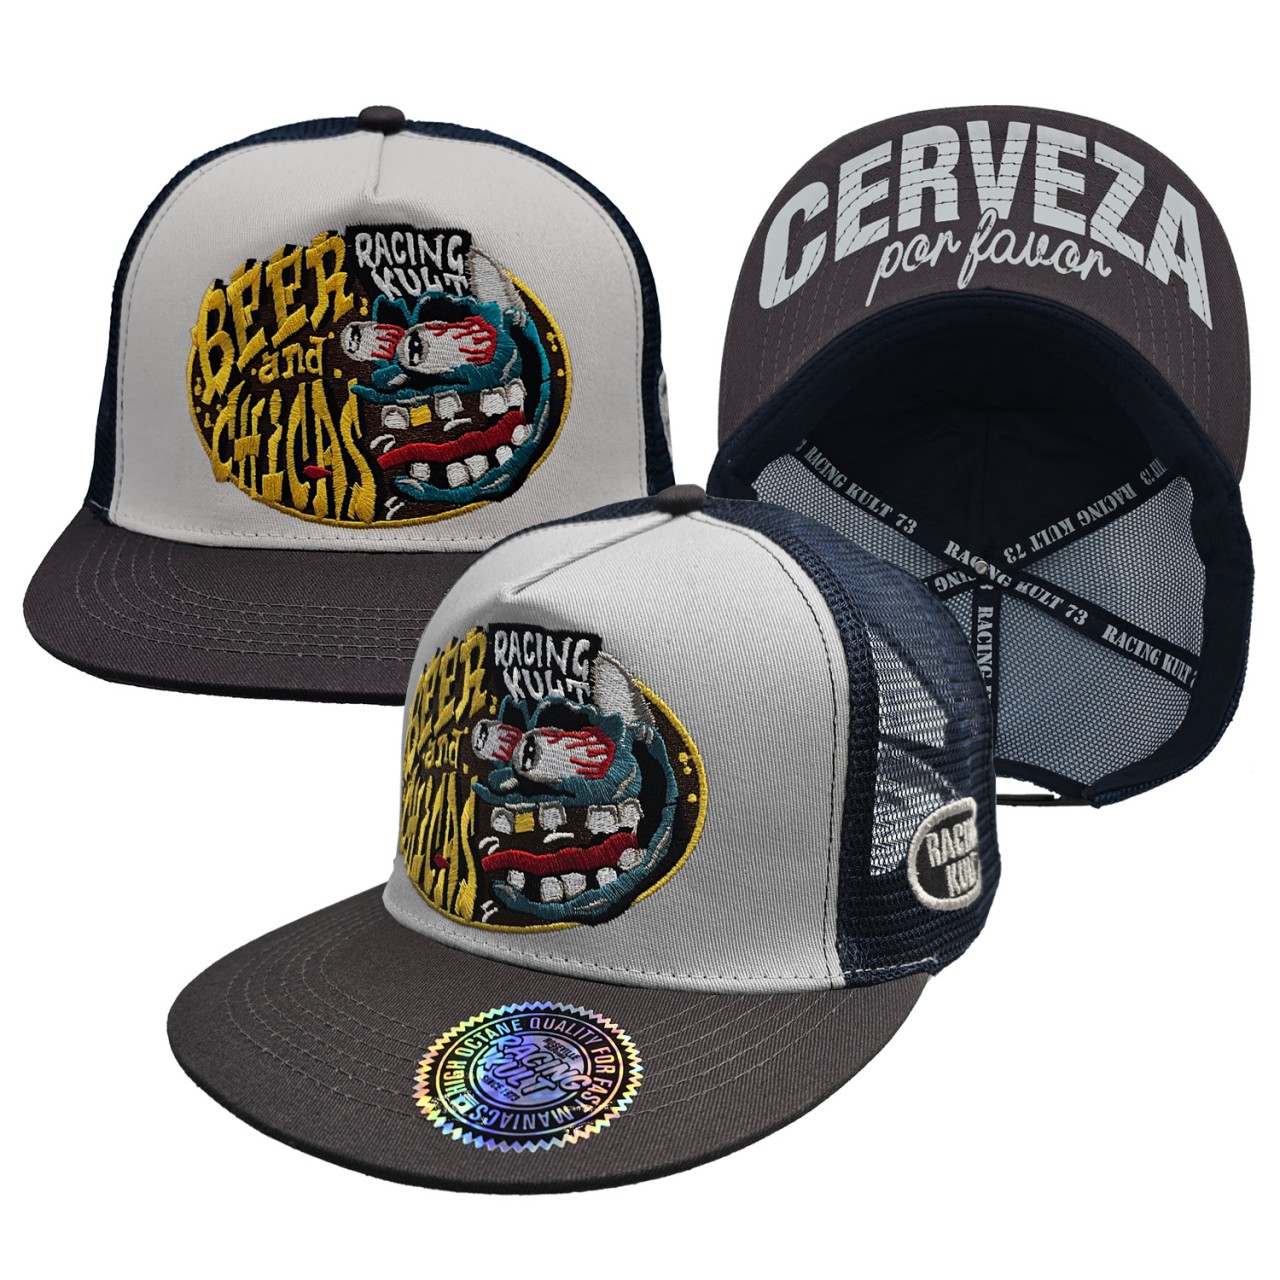 Racing Kult Beer and Chicas Snapback Cap mit Stick Unisex